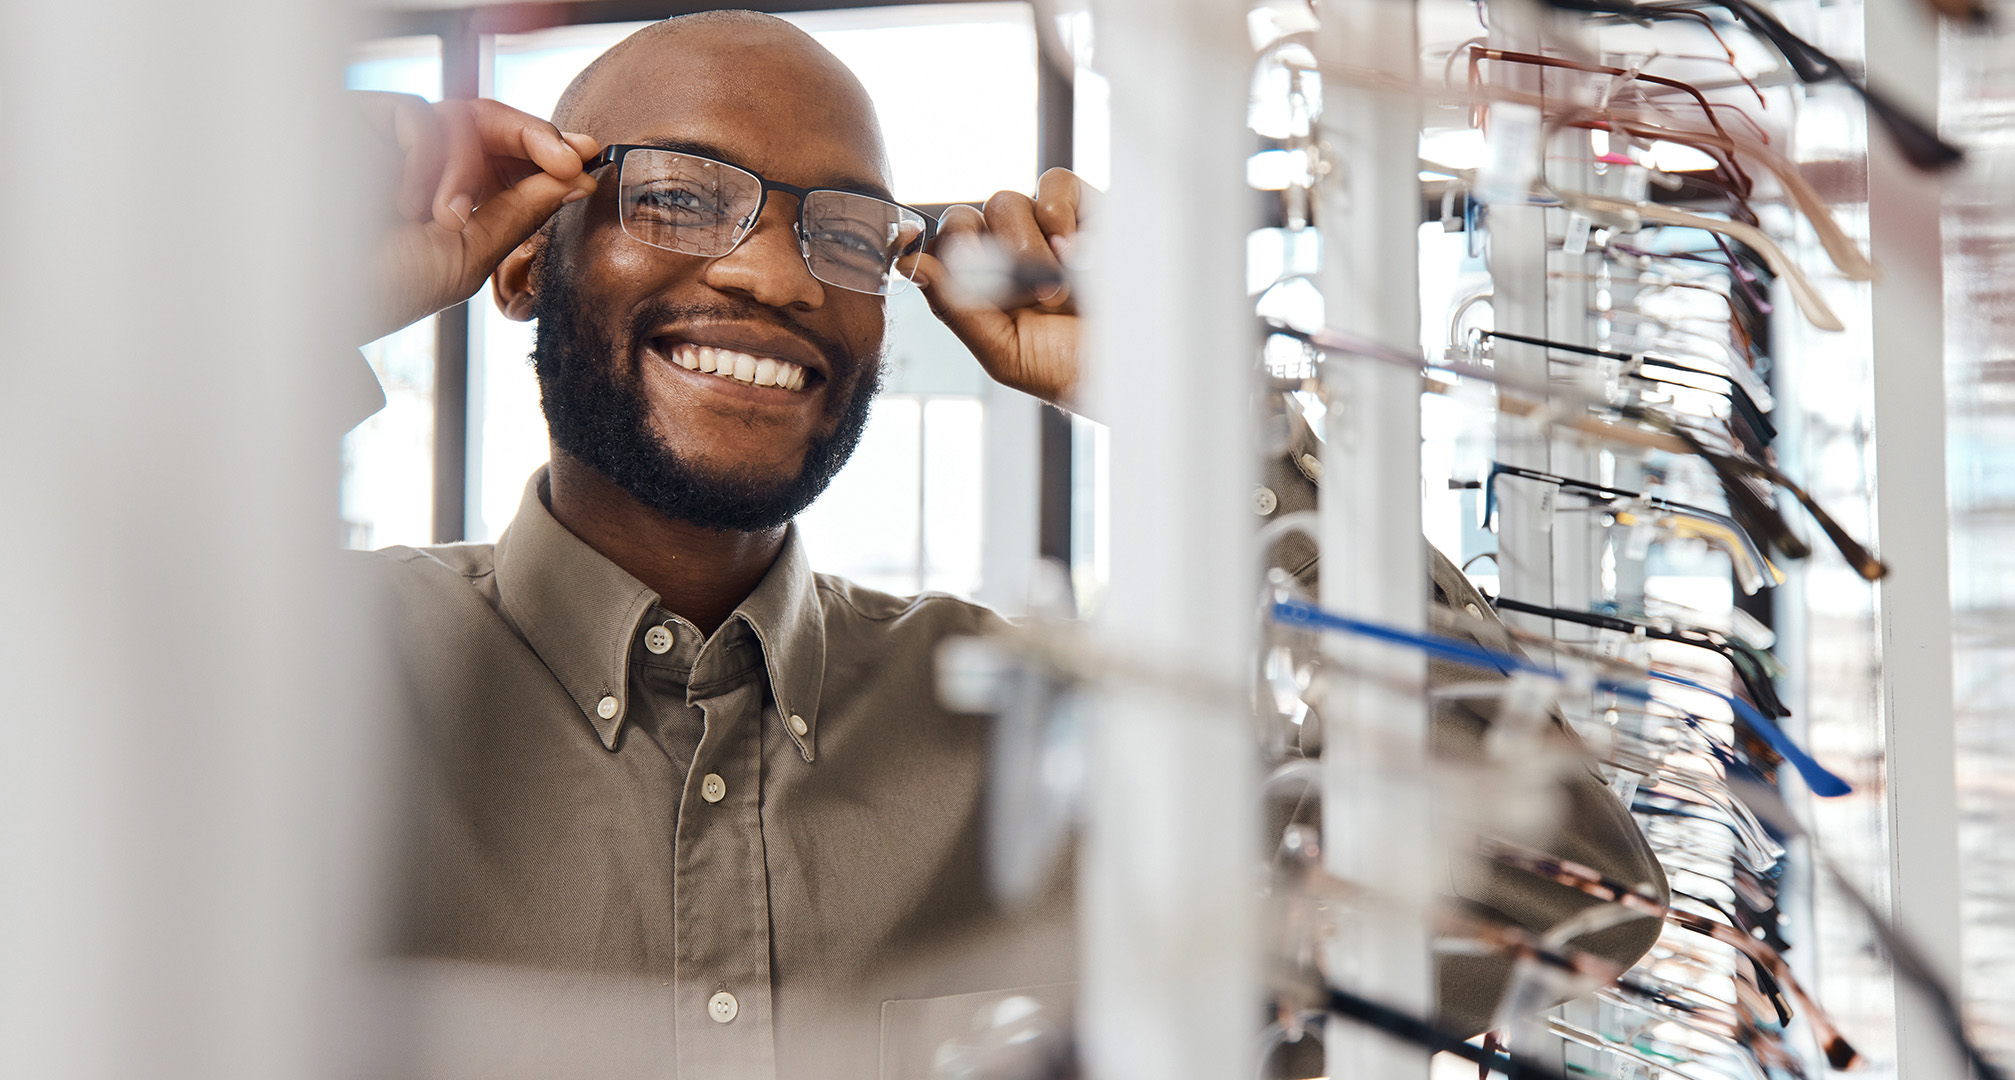 photo of smiling person trying on glasses at optician